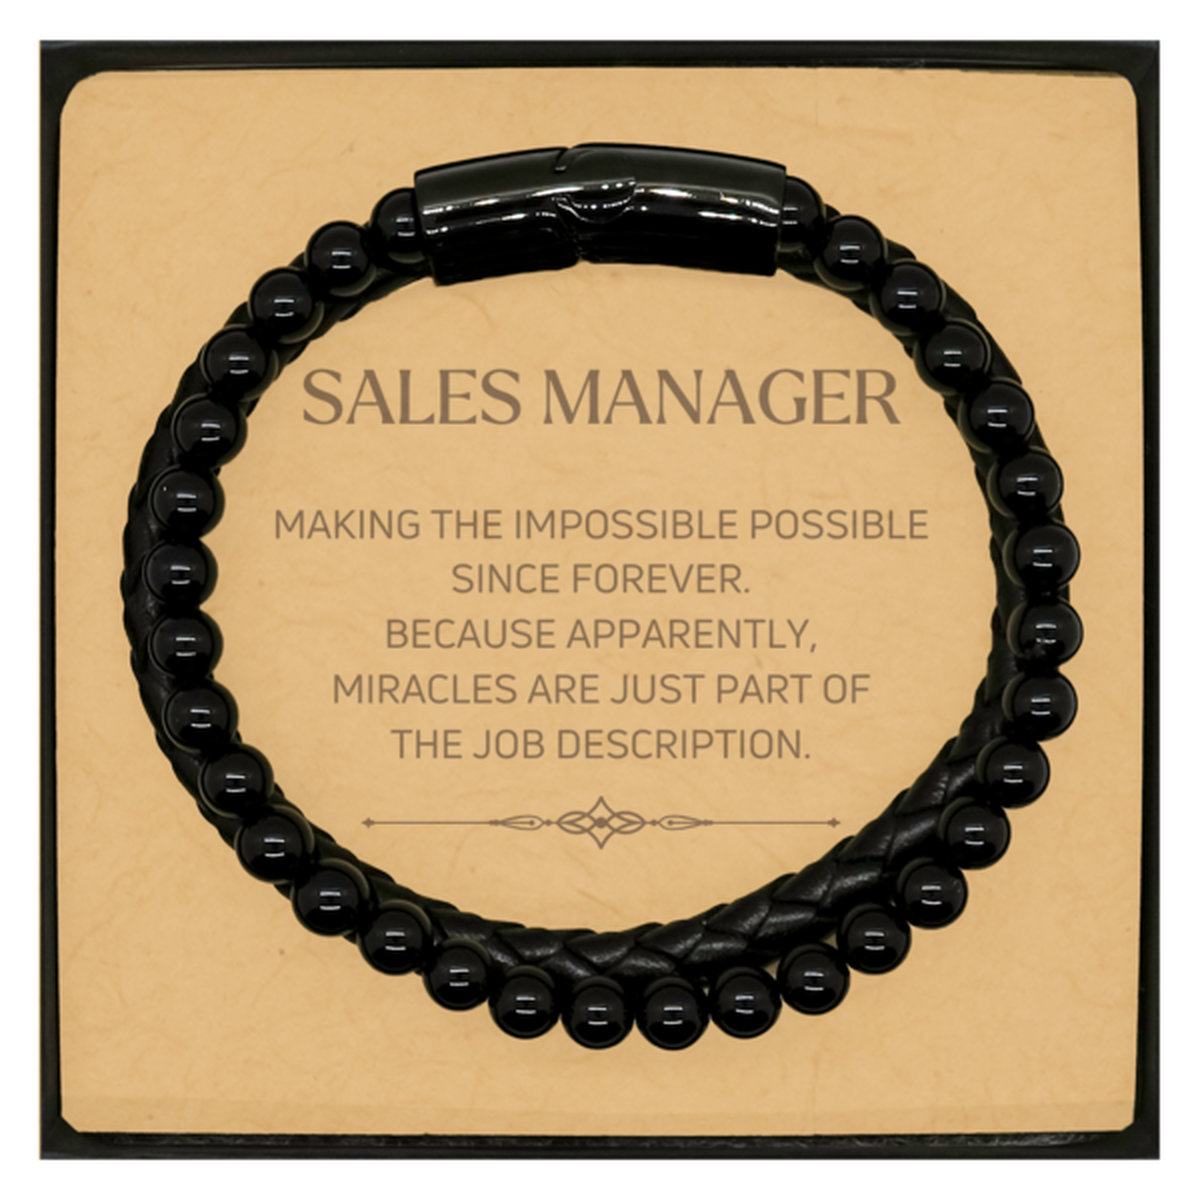 Funny Sales Manager Gifts, Miracles are just part of the job description, Inspirational Birthday Christmas Stone Leather Bracelets For Sales Manager, Men, Women, Coworkers, Friends, Boss